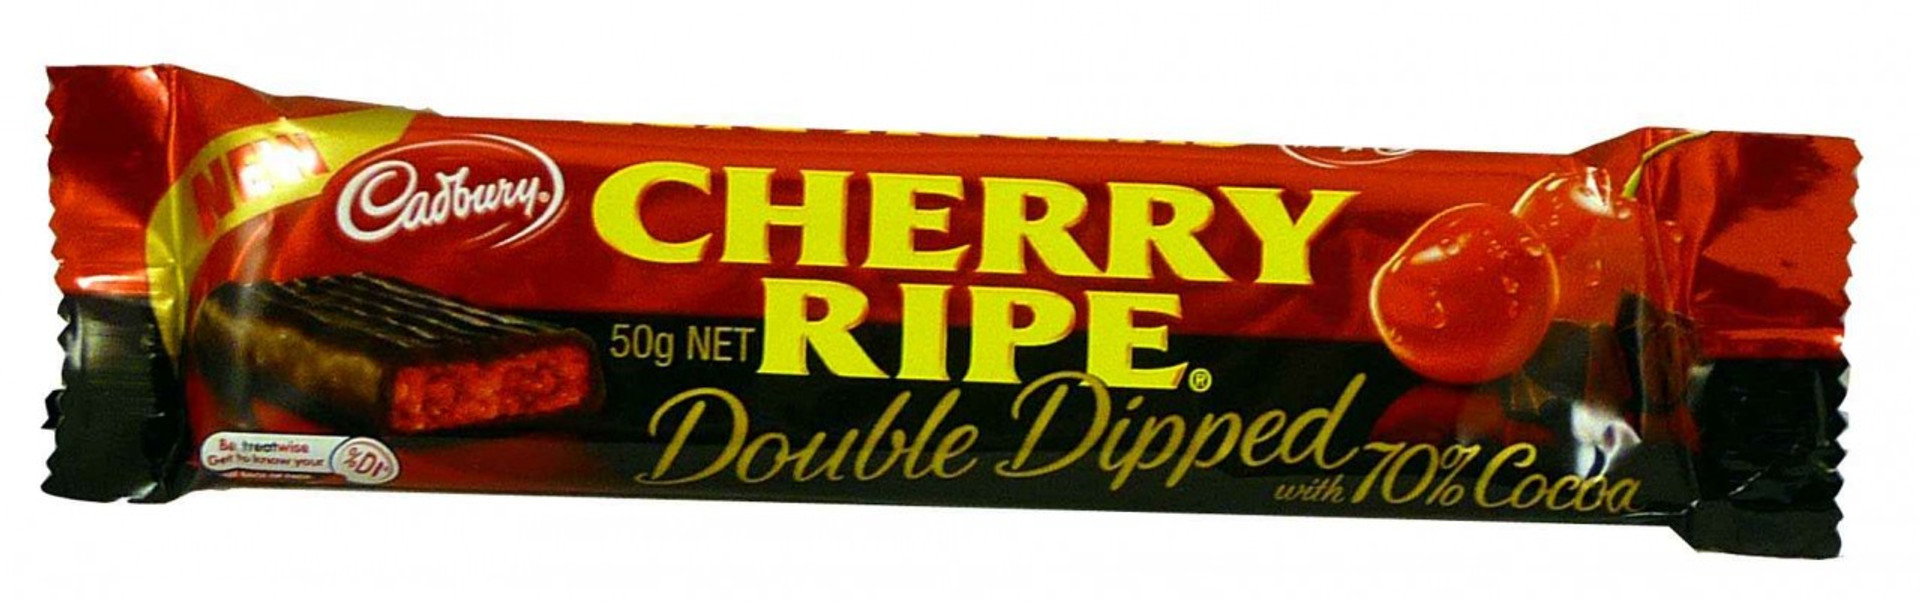 Cadbury Cherry Ripe - Looking for it? Find them, and other ...